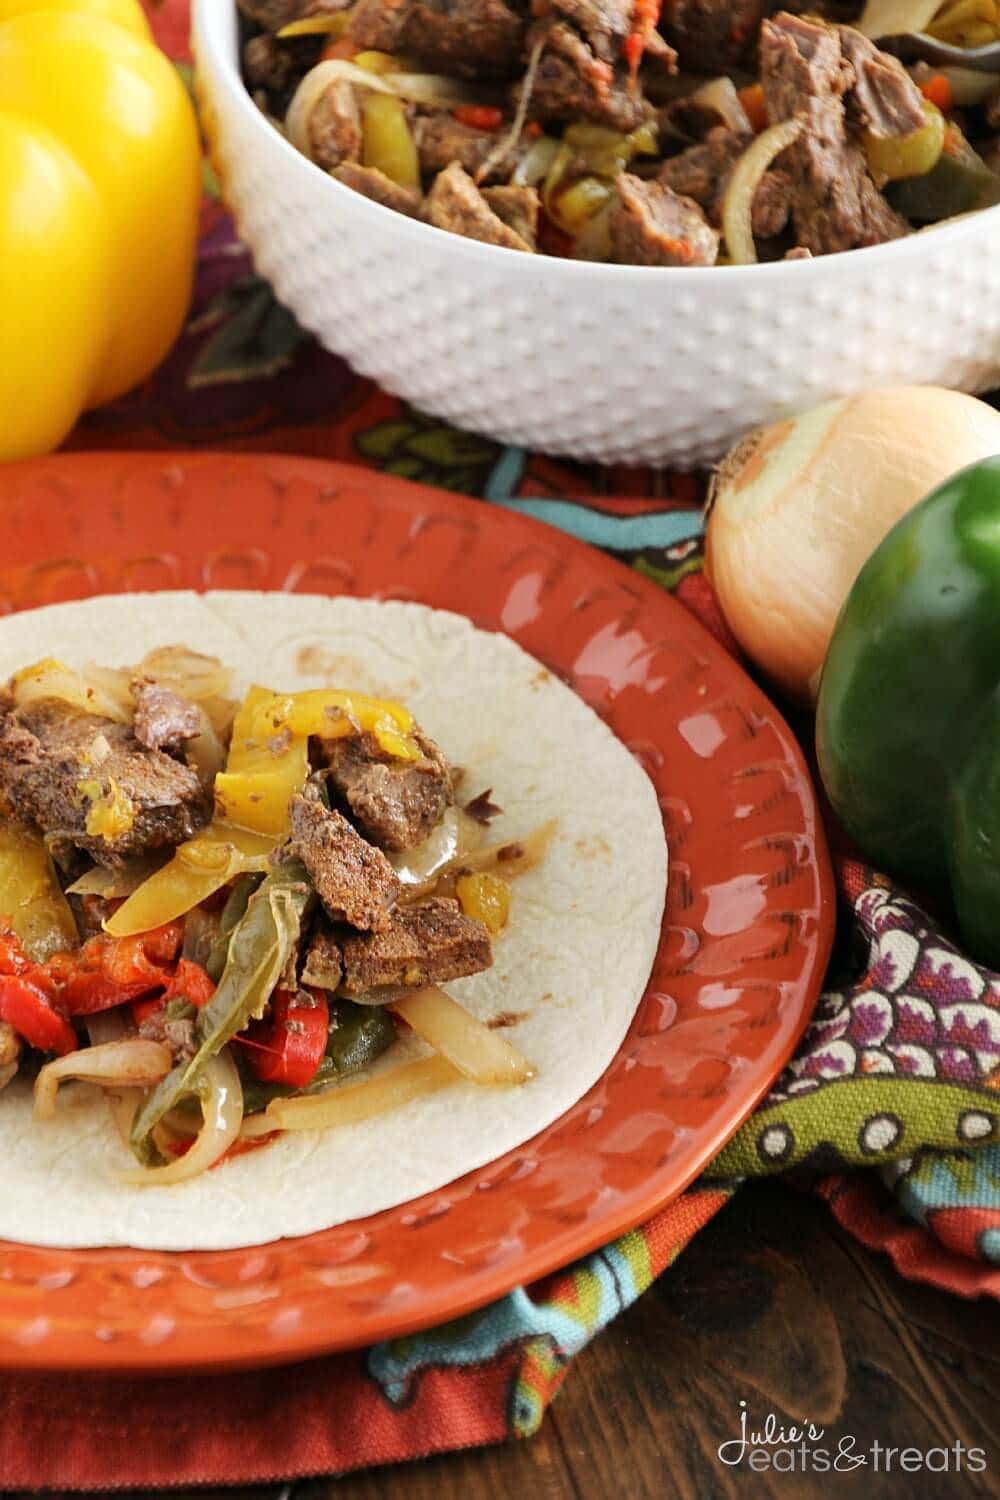 Crock Pot Steak Fajitas ~ Loaded with Steak, Red Peppers, Green Peppers, Yellow, Peppers, Onions and Spices! Piled High on a Tortilla Shell! The Perfect Quick, Easy Weeknight Recipe!